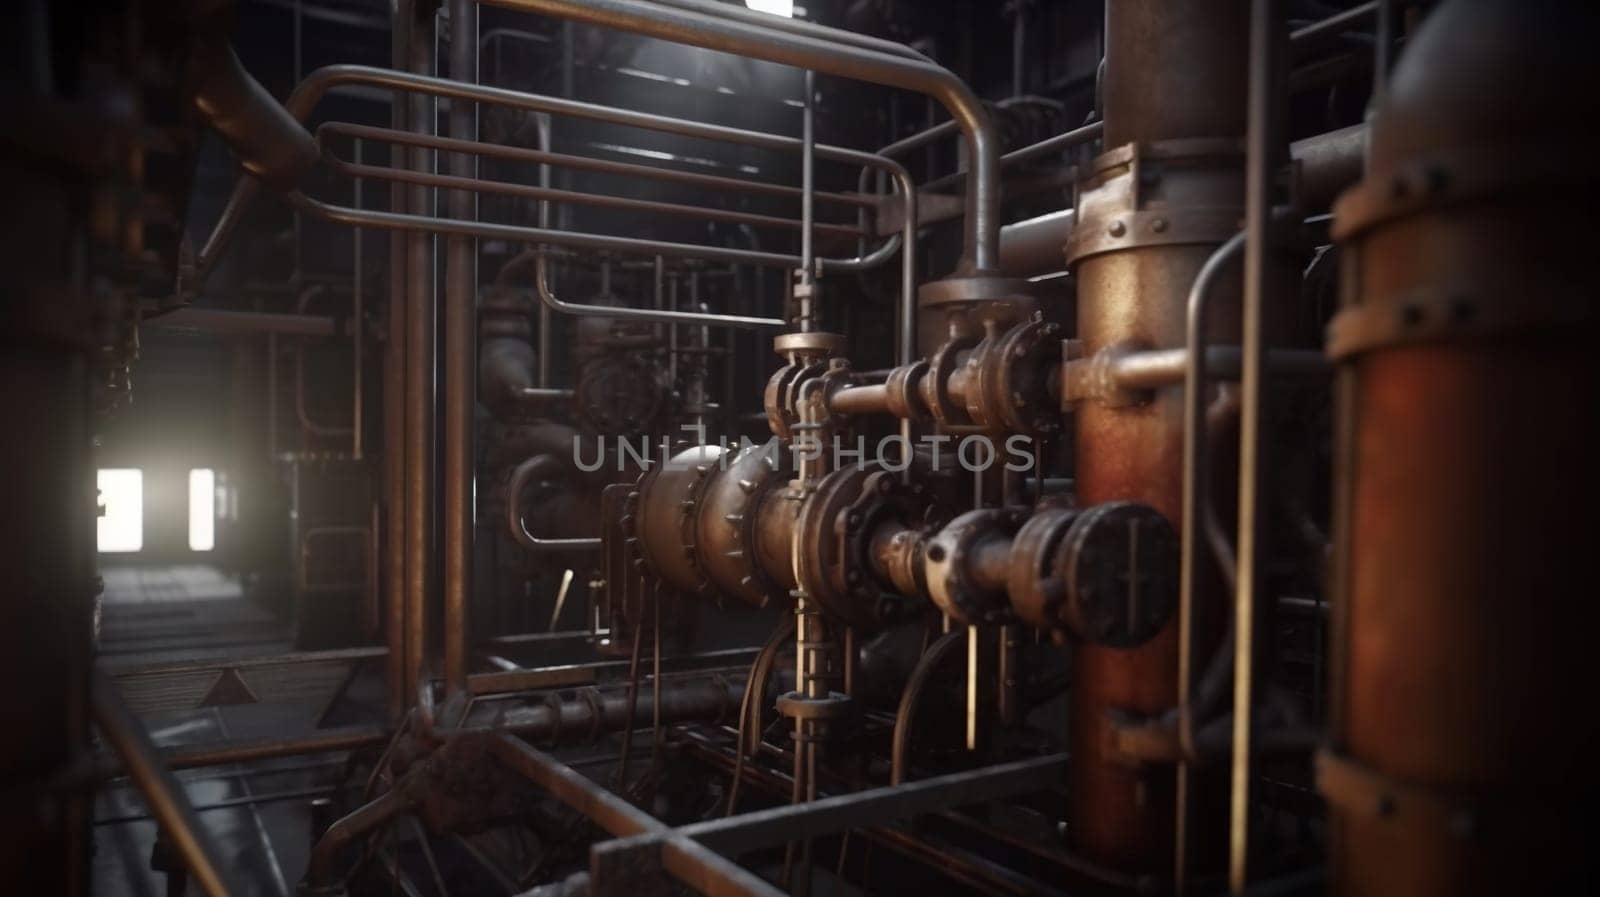 Industrial plant background with shiny pipes. Generated AI